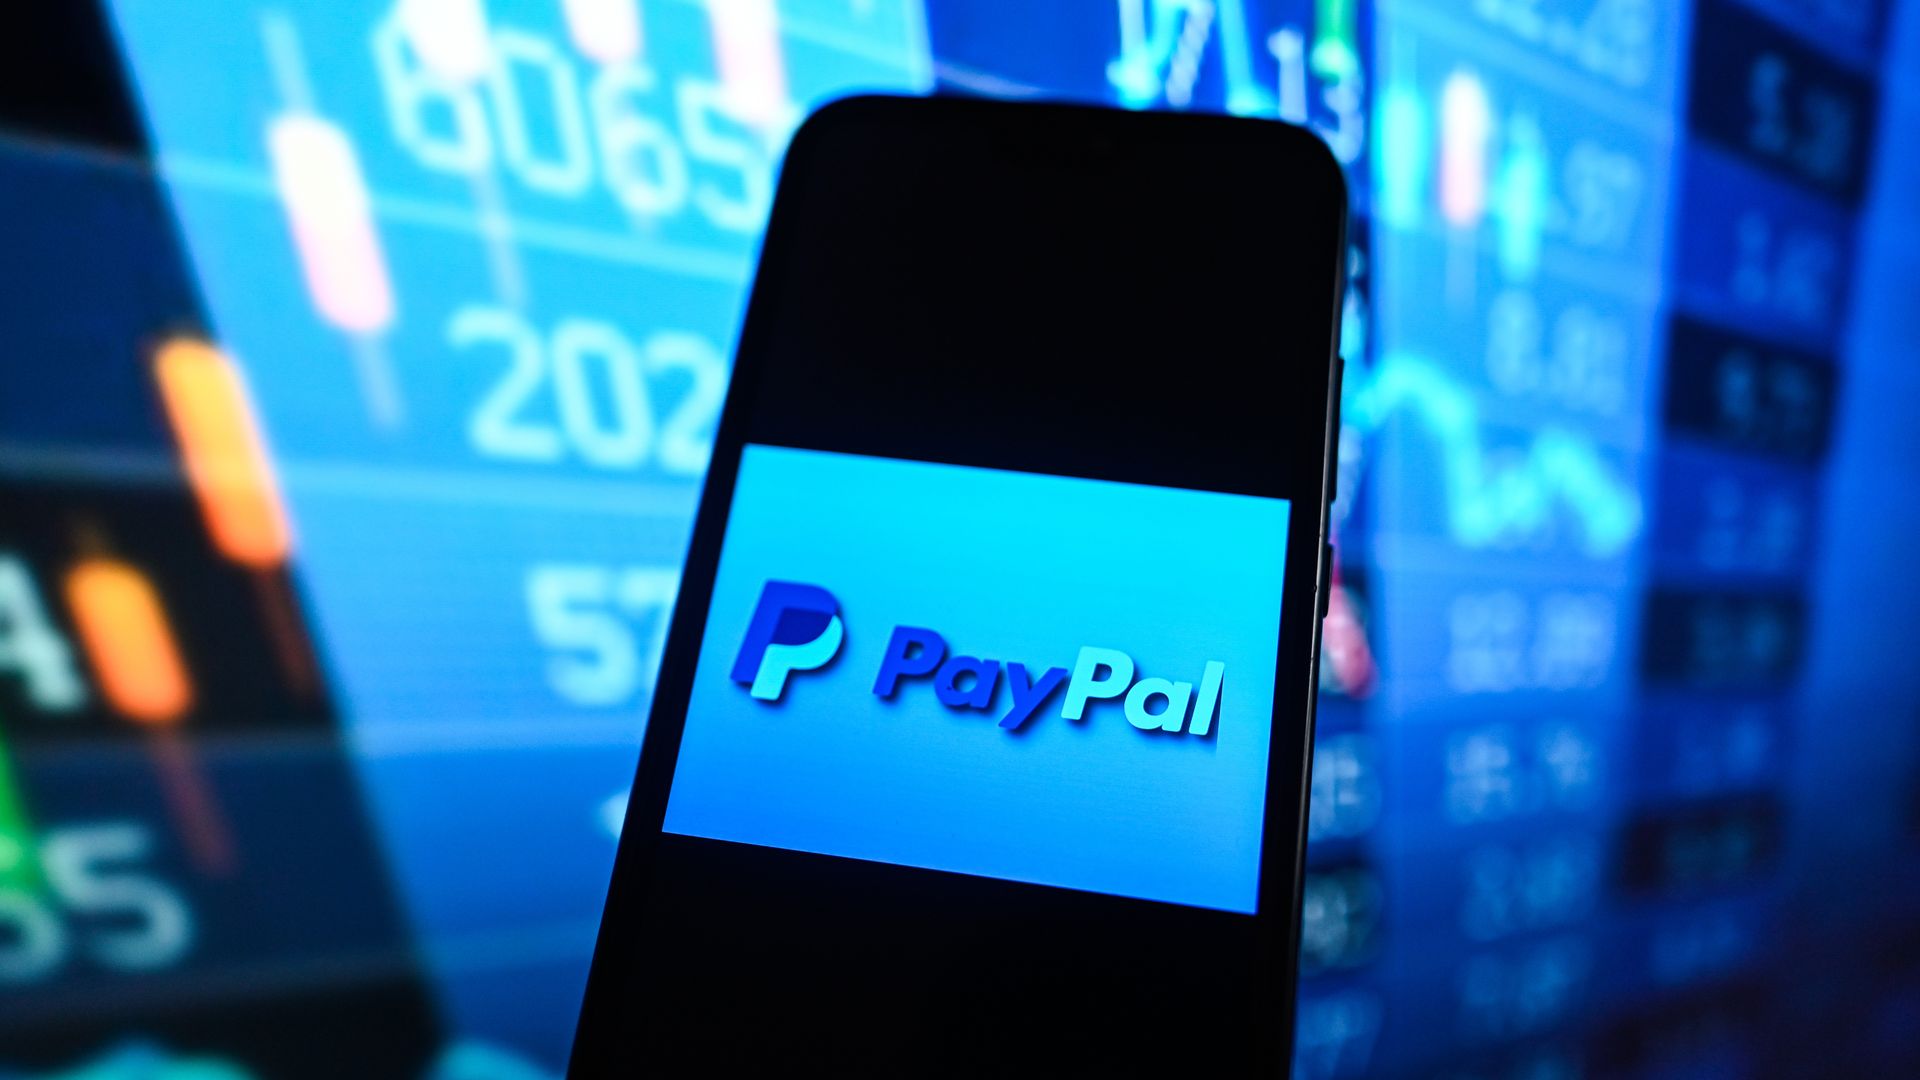 Image of a PayPal logo on a phone screen.